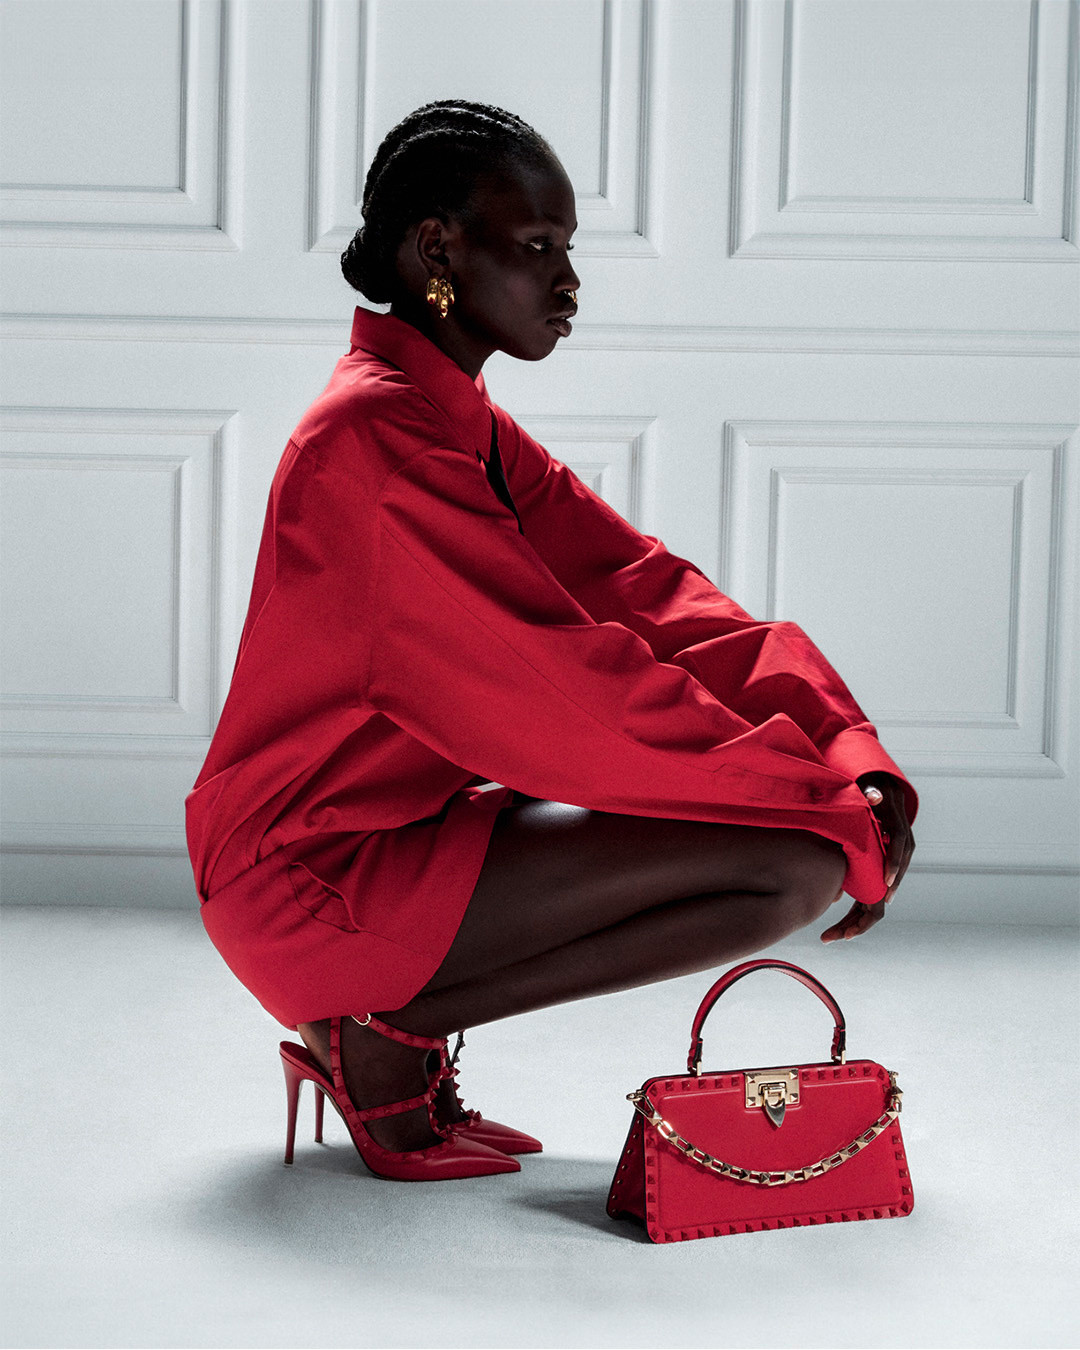 Milan Shopping Christmas: 5 most luxury handbags brands for her